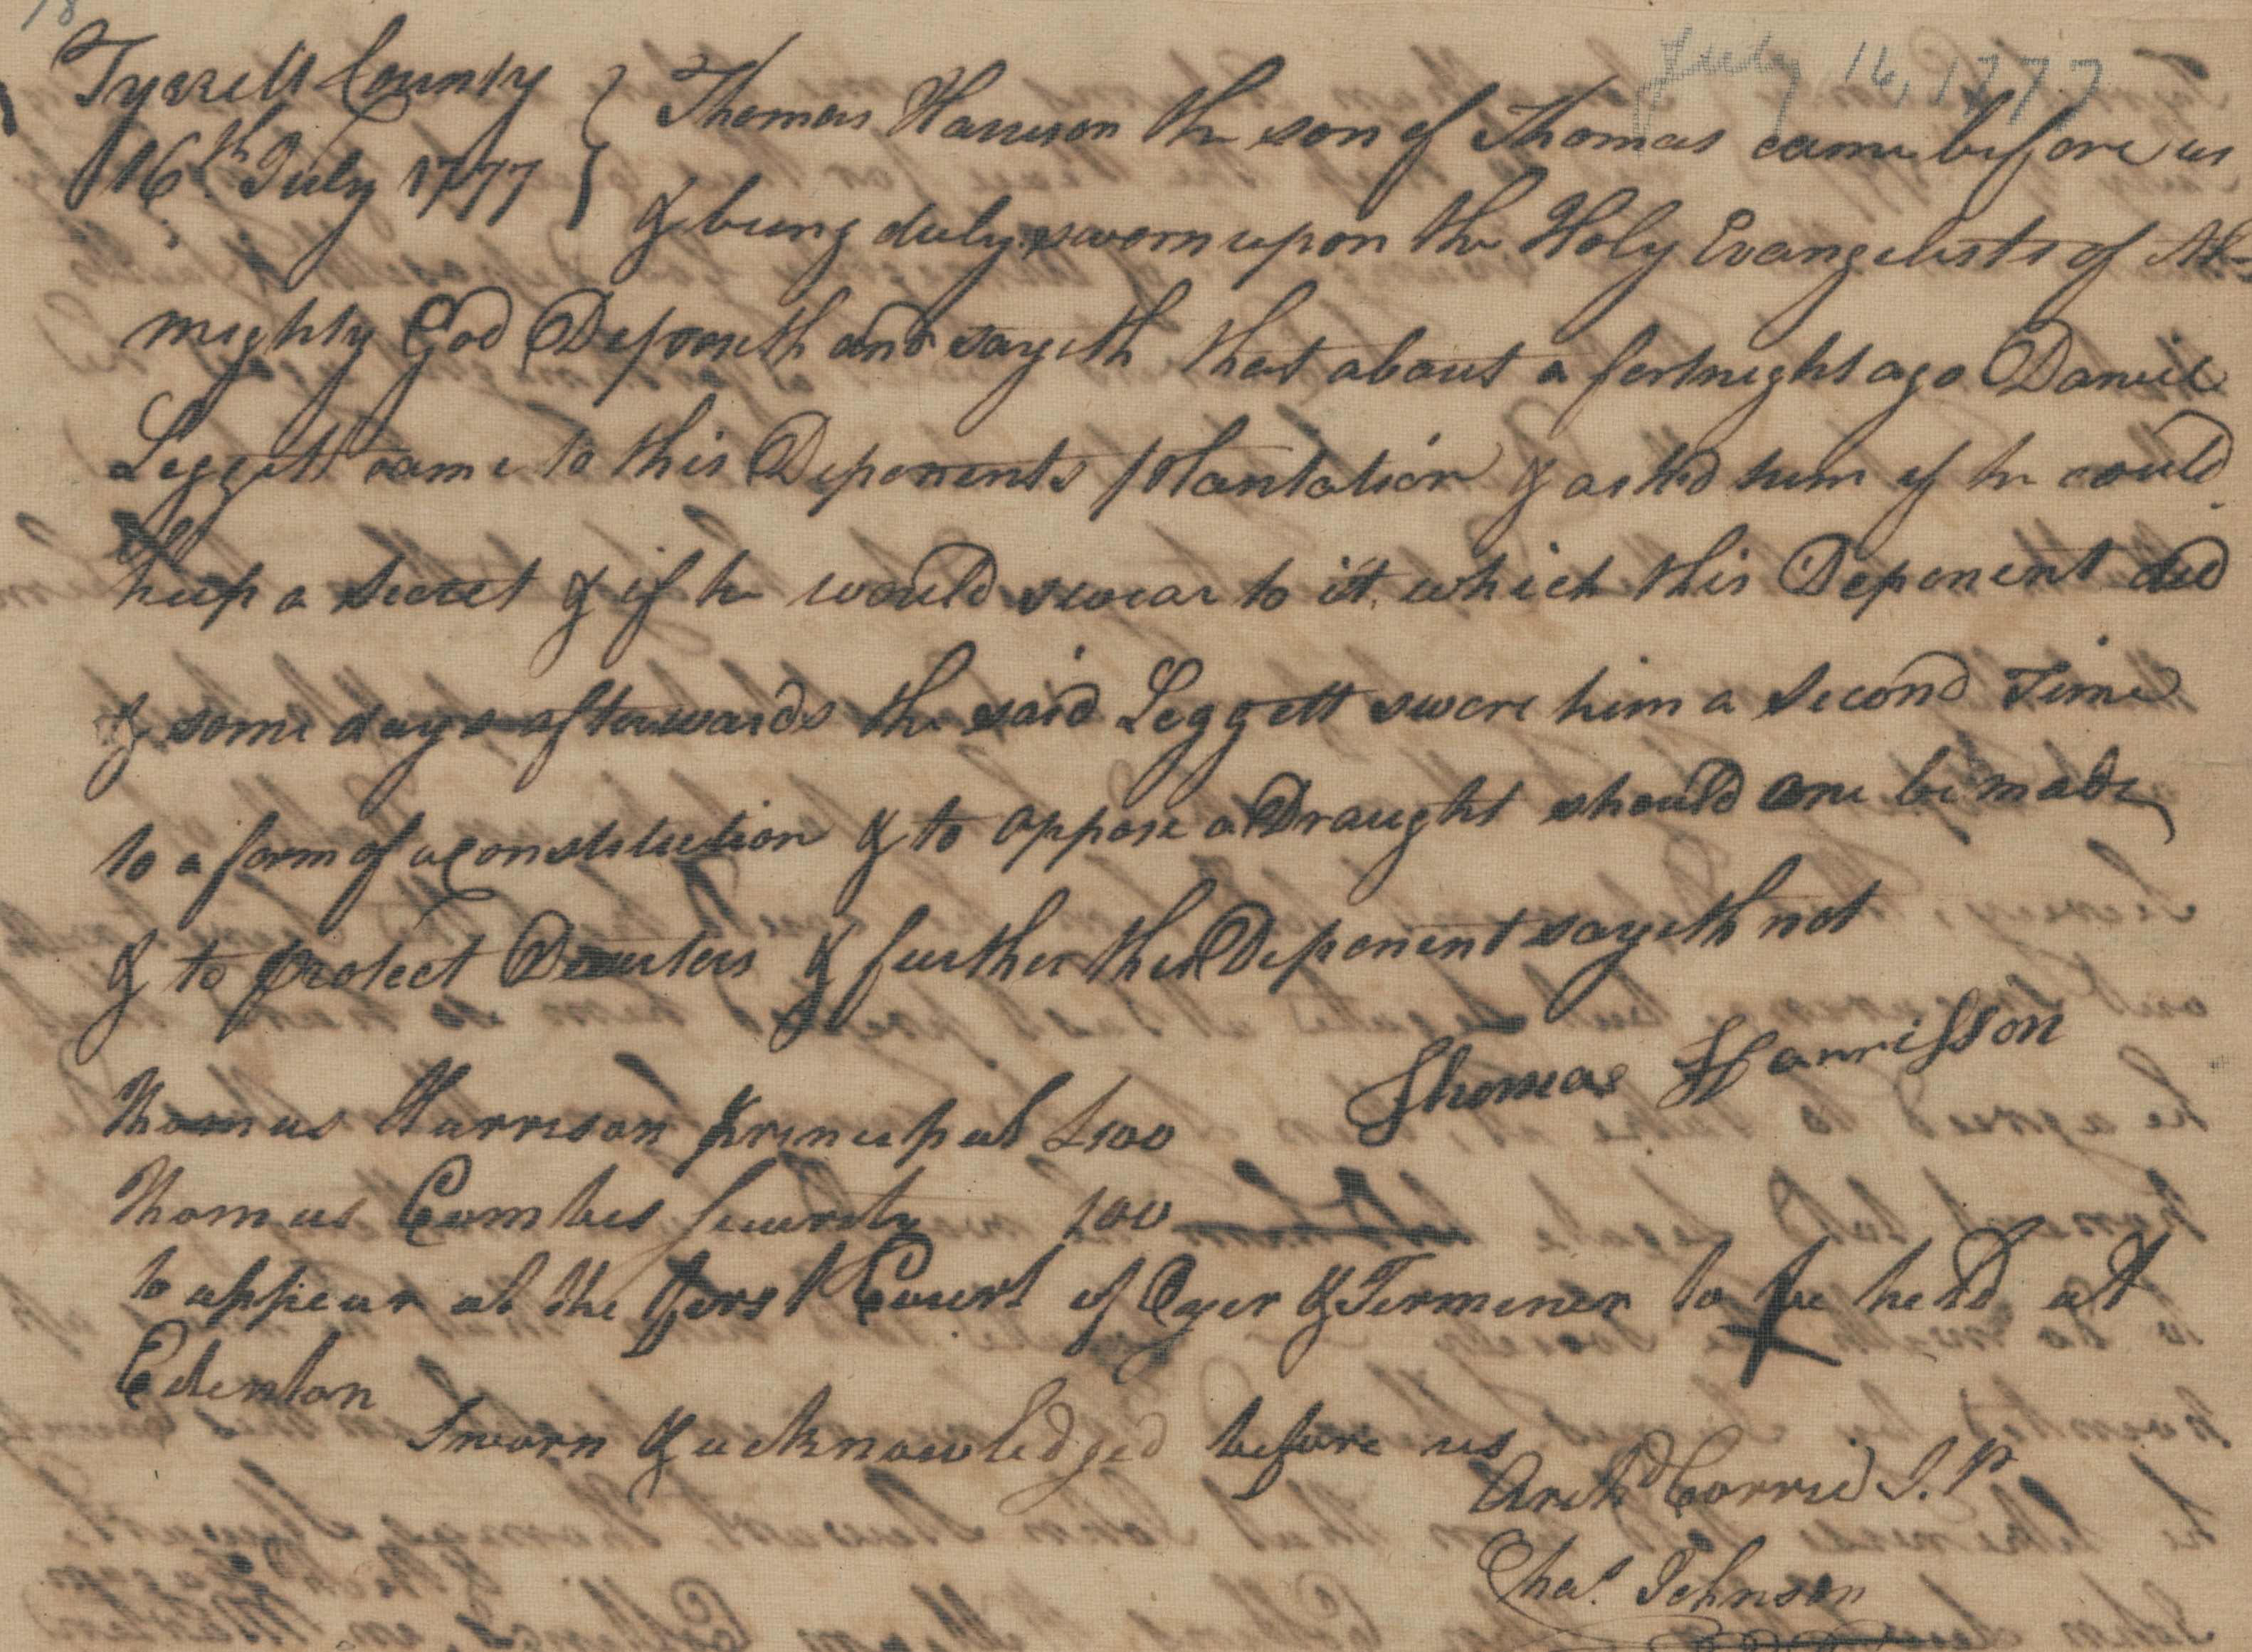 Deposition of Thomas Harrison Jr., 16 July 1777, page 1